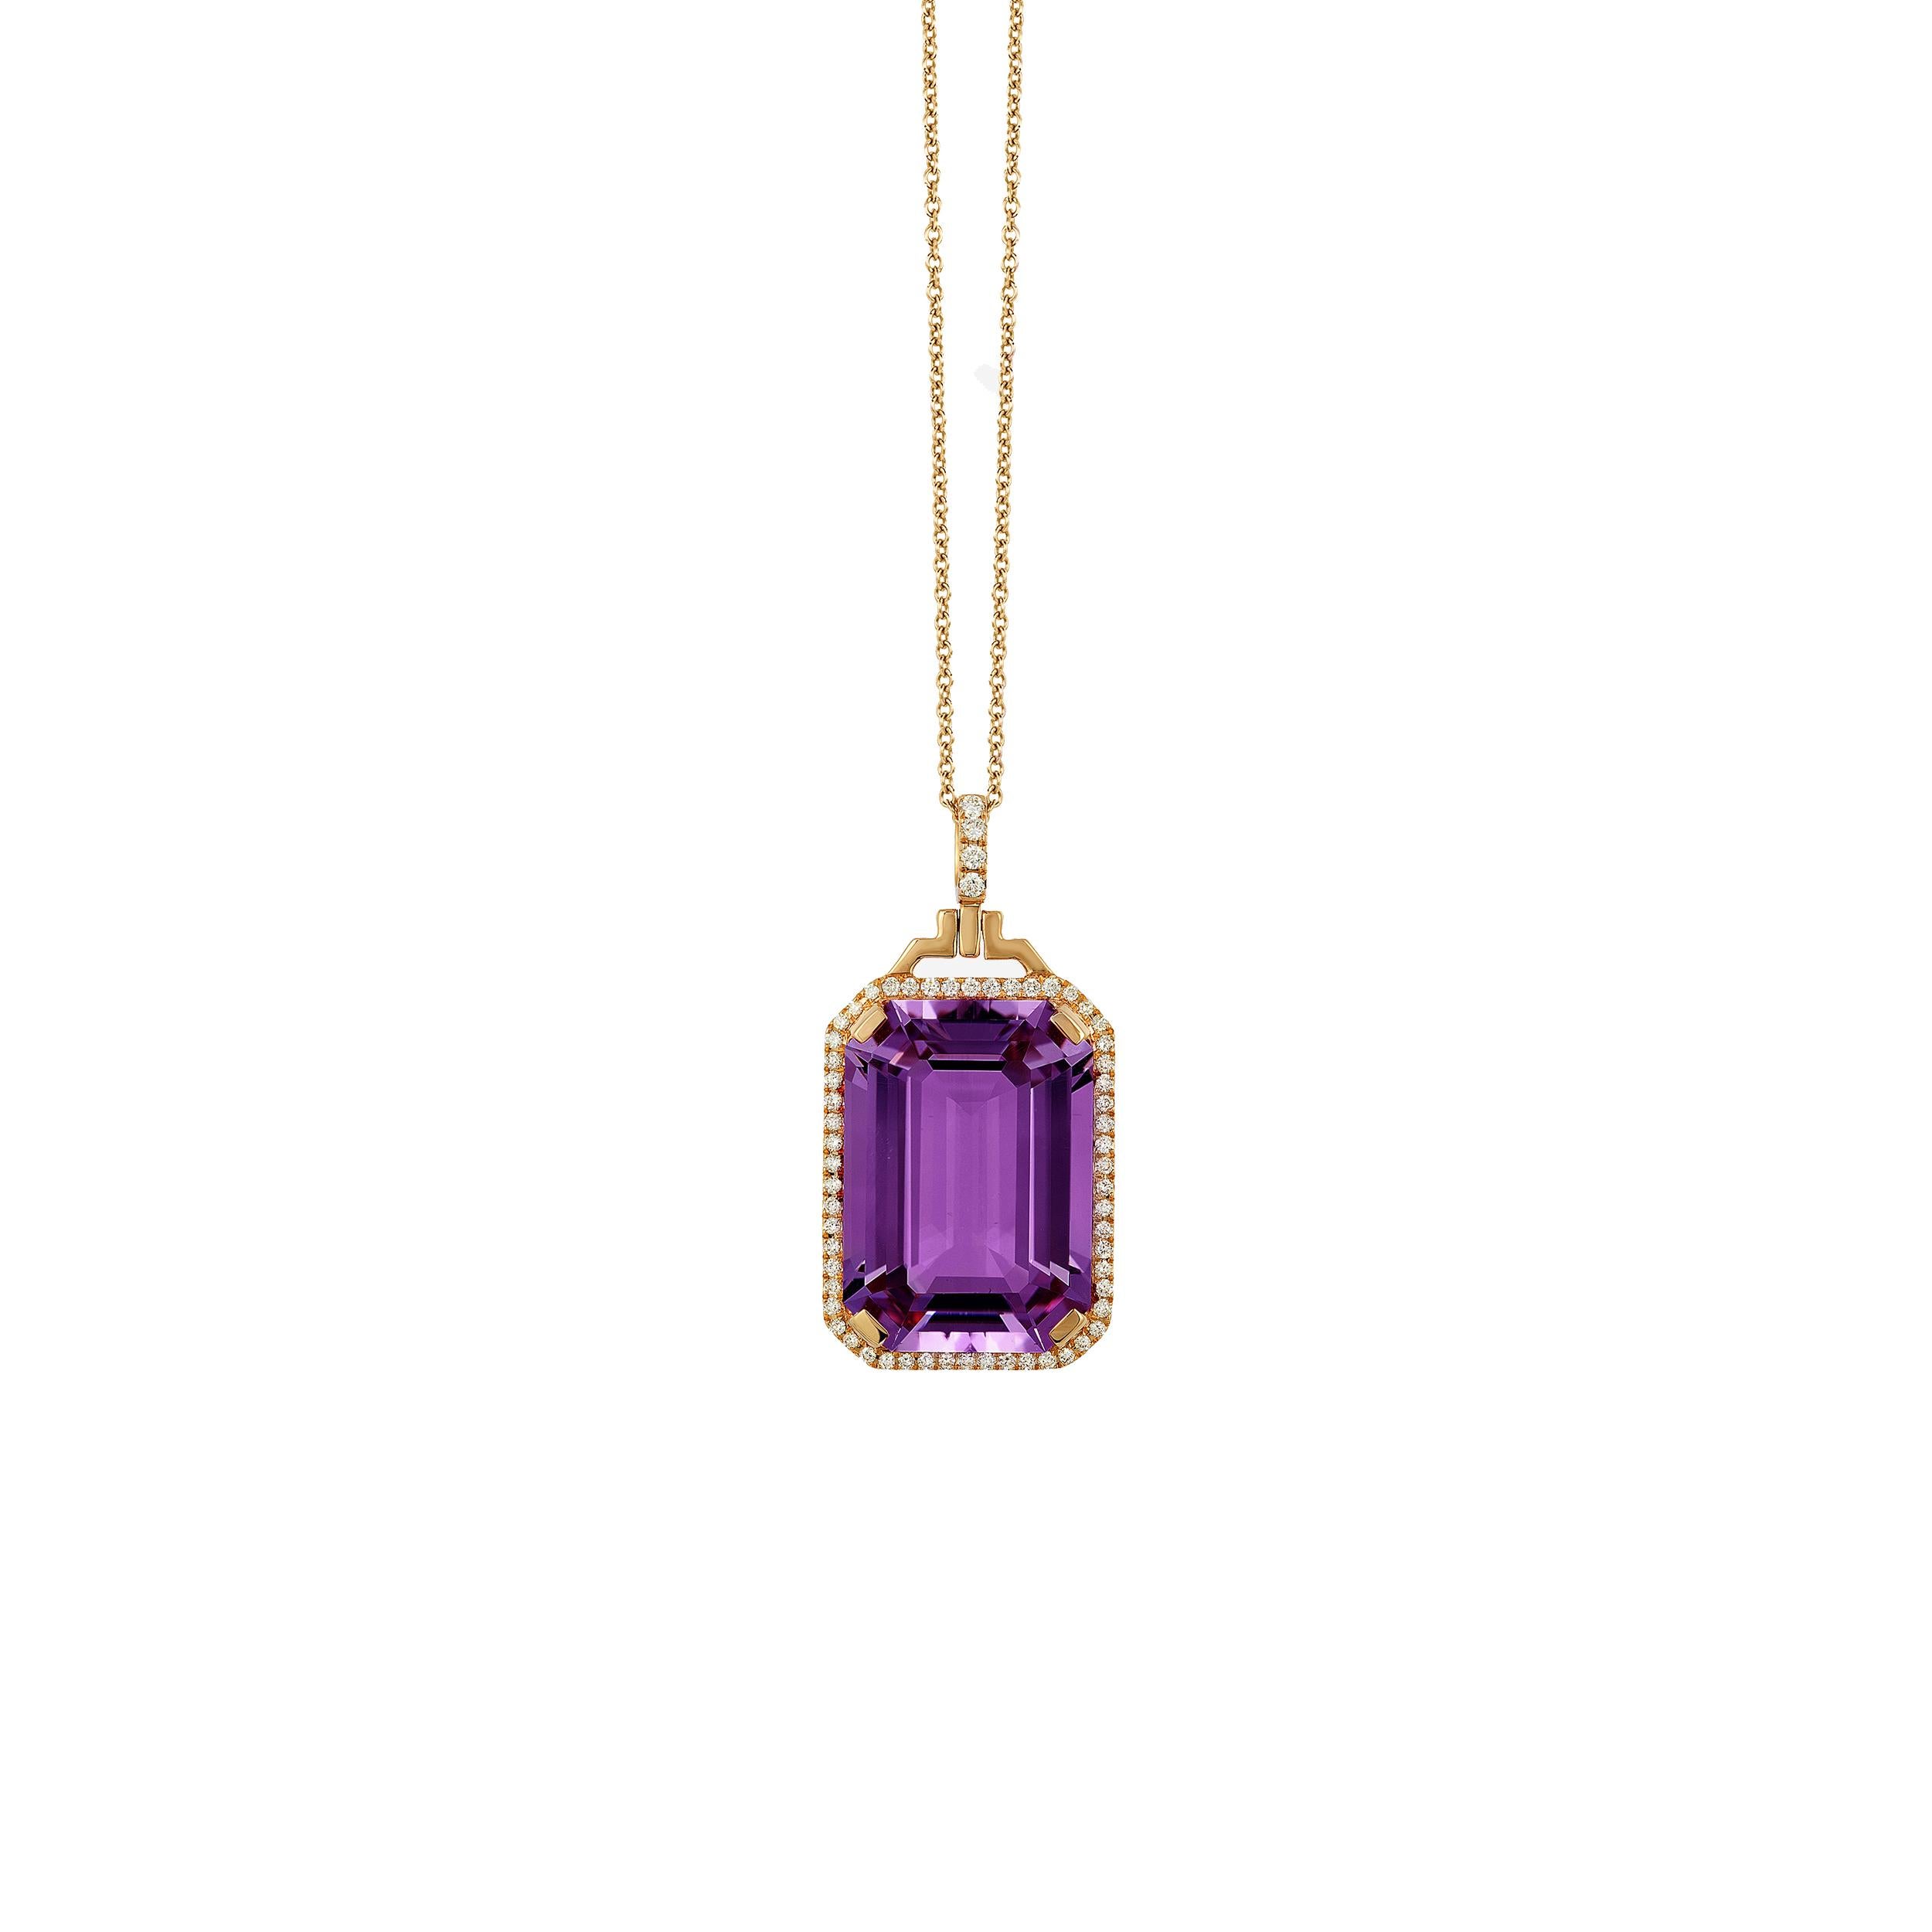 Amethyst Emerald Cut Pendant with Diamonds in 18K Yellow Gold, from 'Gossip' Collection.
Please allow 4-5 weeks for this item to be delivered.
 
 on a 18'' Chain
 
 Stone Size: 14 x 20 mm 
 
 Gemstone Approx Wt: Amethyst-15.90 Carats 
 
 Diamonds: